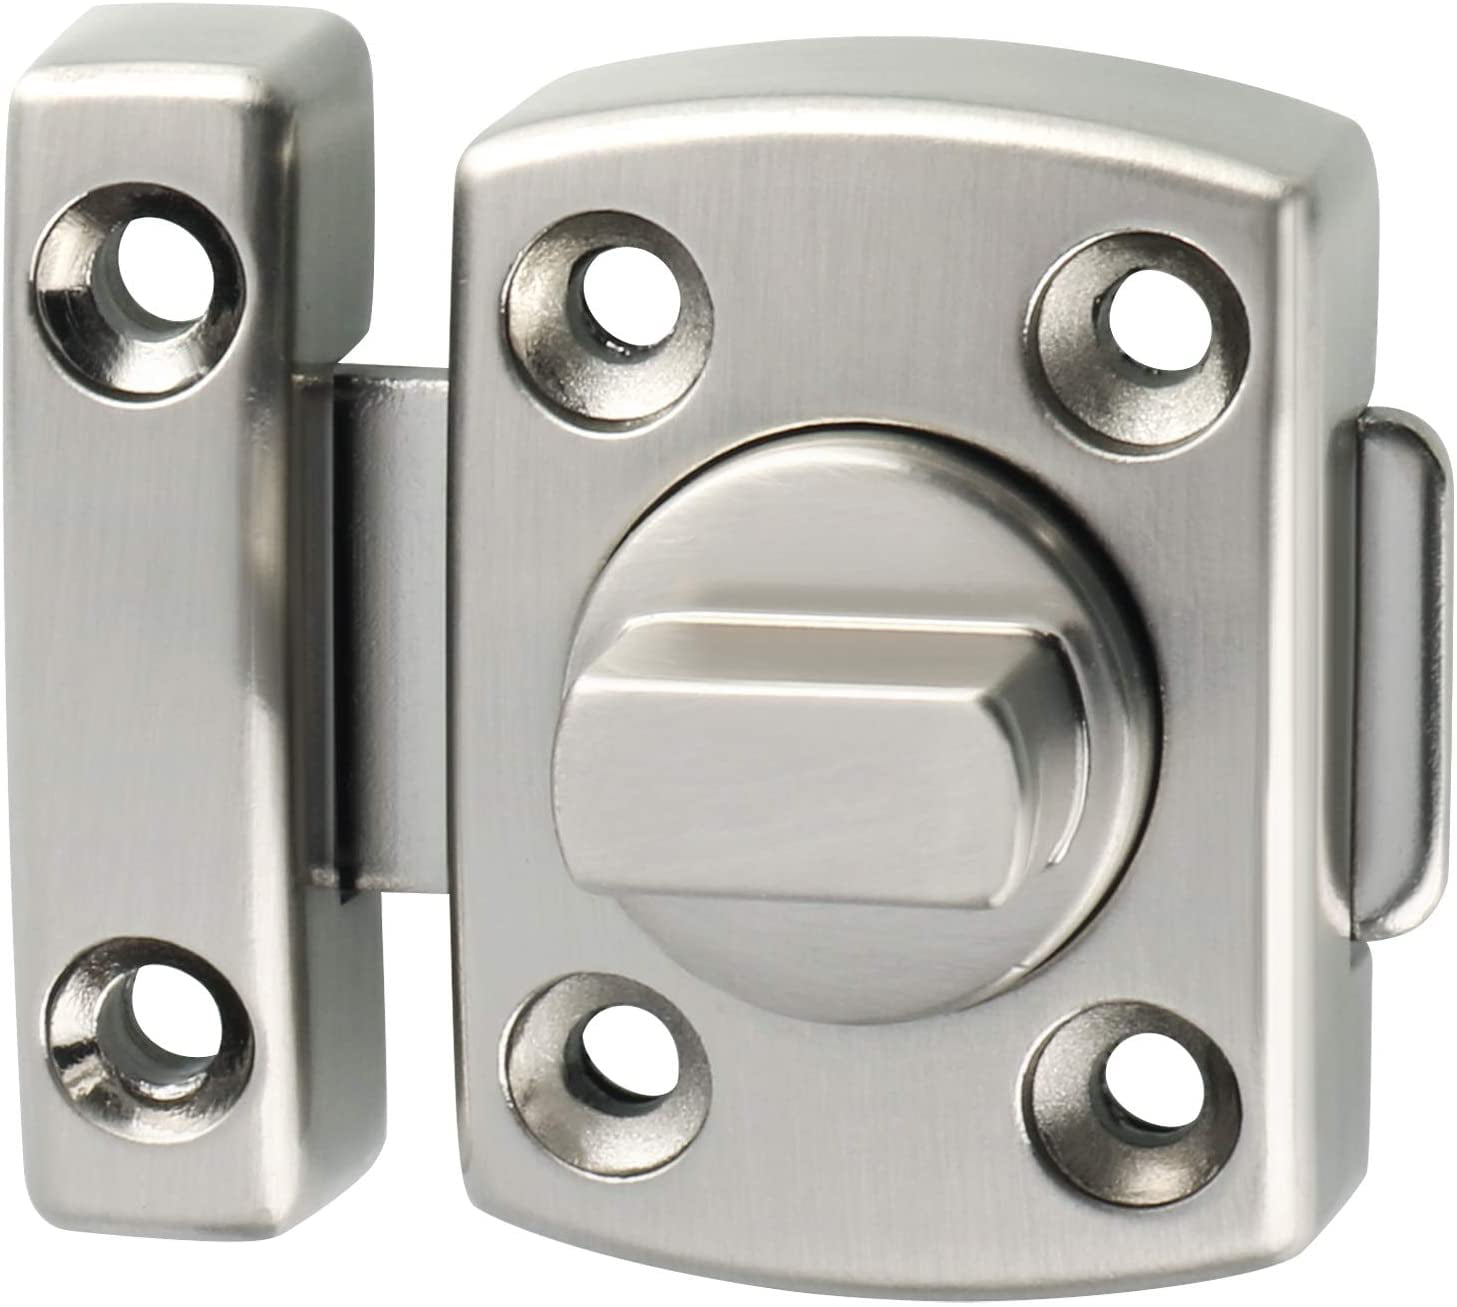 MS220U Brushed Finish Rotate Bolt Latch Gate Latches Safety Door Slide Lock 